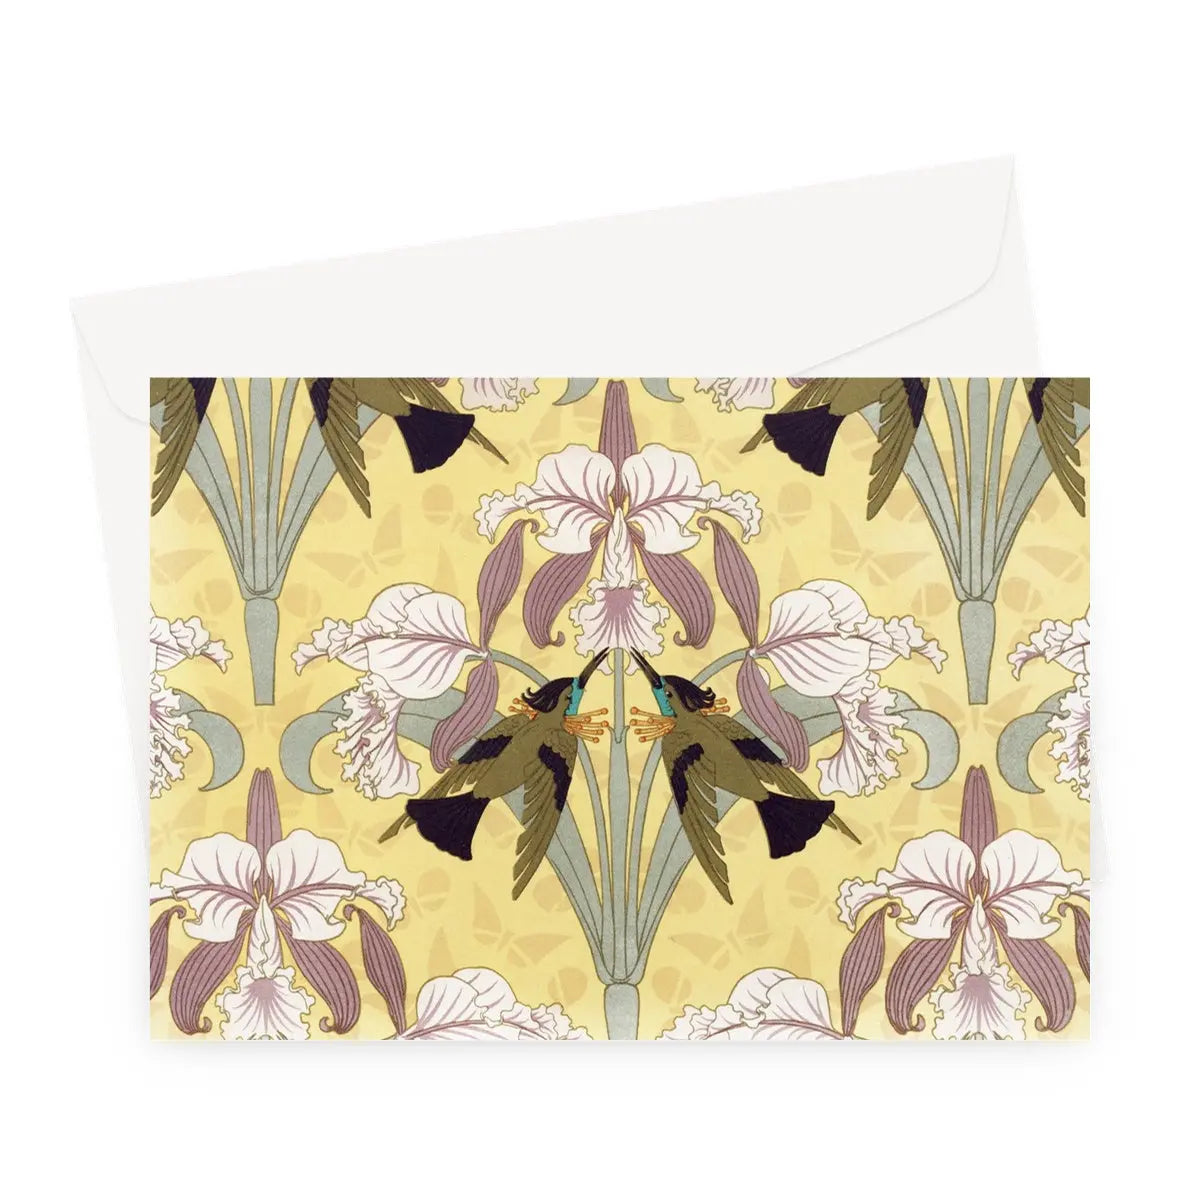 Oiseaux-mouches Et Orchidées By Maurice Pillard Verneuil Greeting Card - A5 Landscape / 10 Cards - Greeting & Note